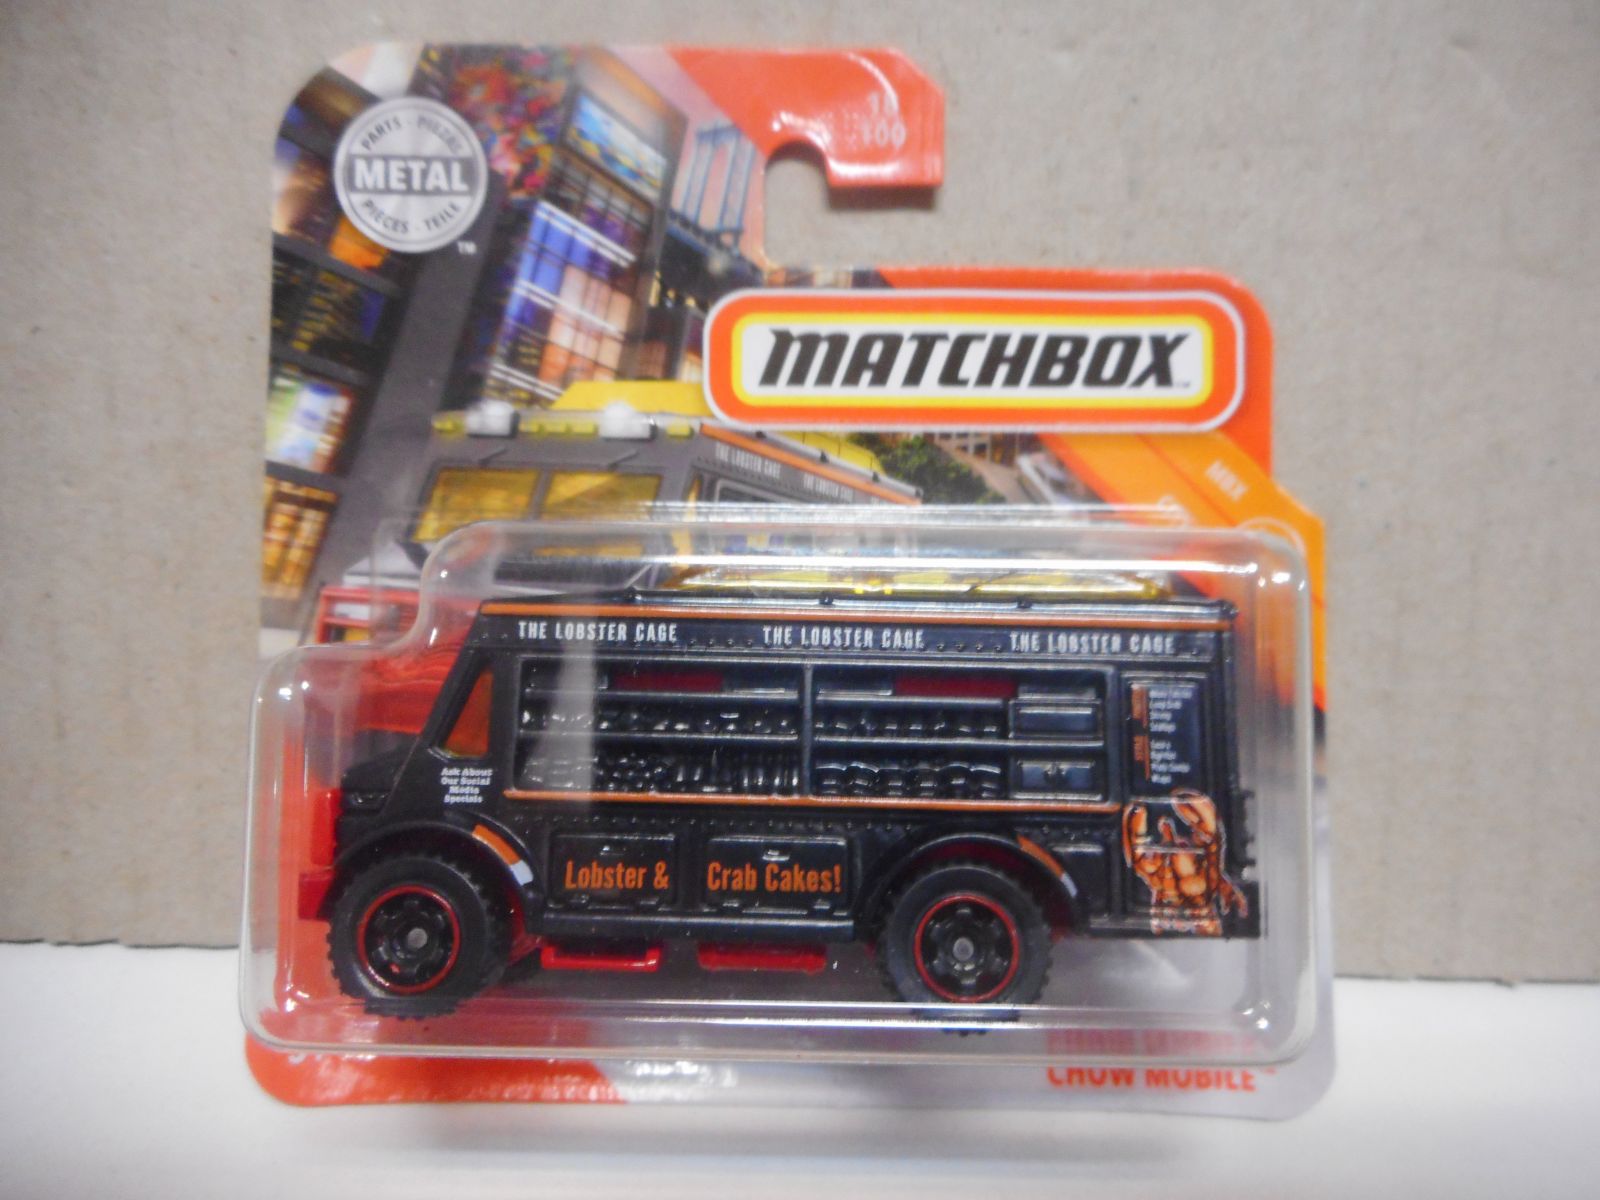 Chow mobile MATCHBOX 53/125 1:64 OVP NUOVO 